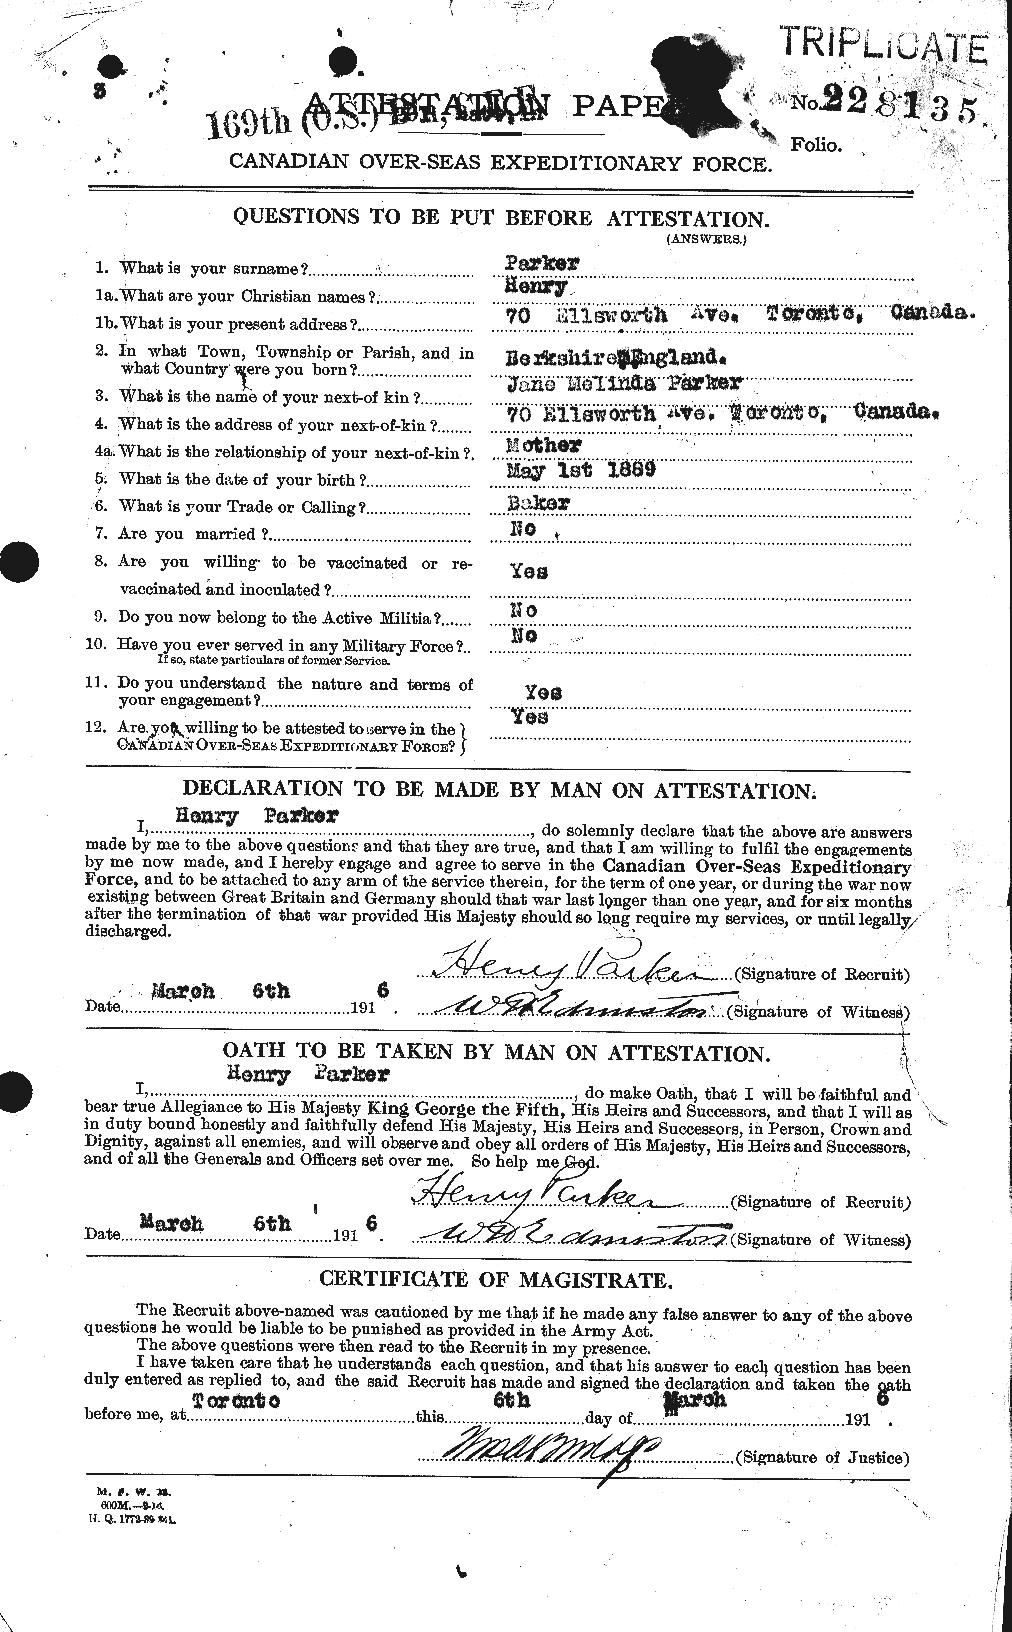 Personnel Records of the First World War - CEF 565344a